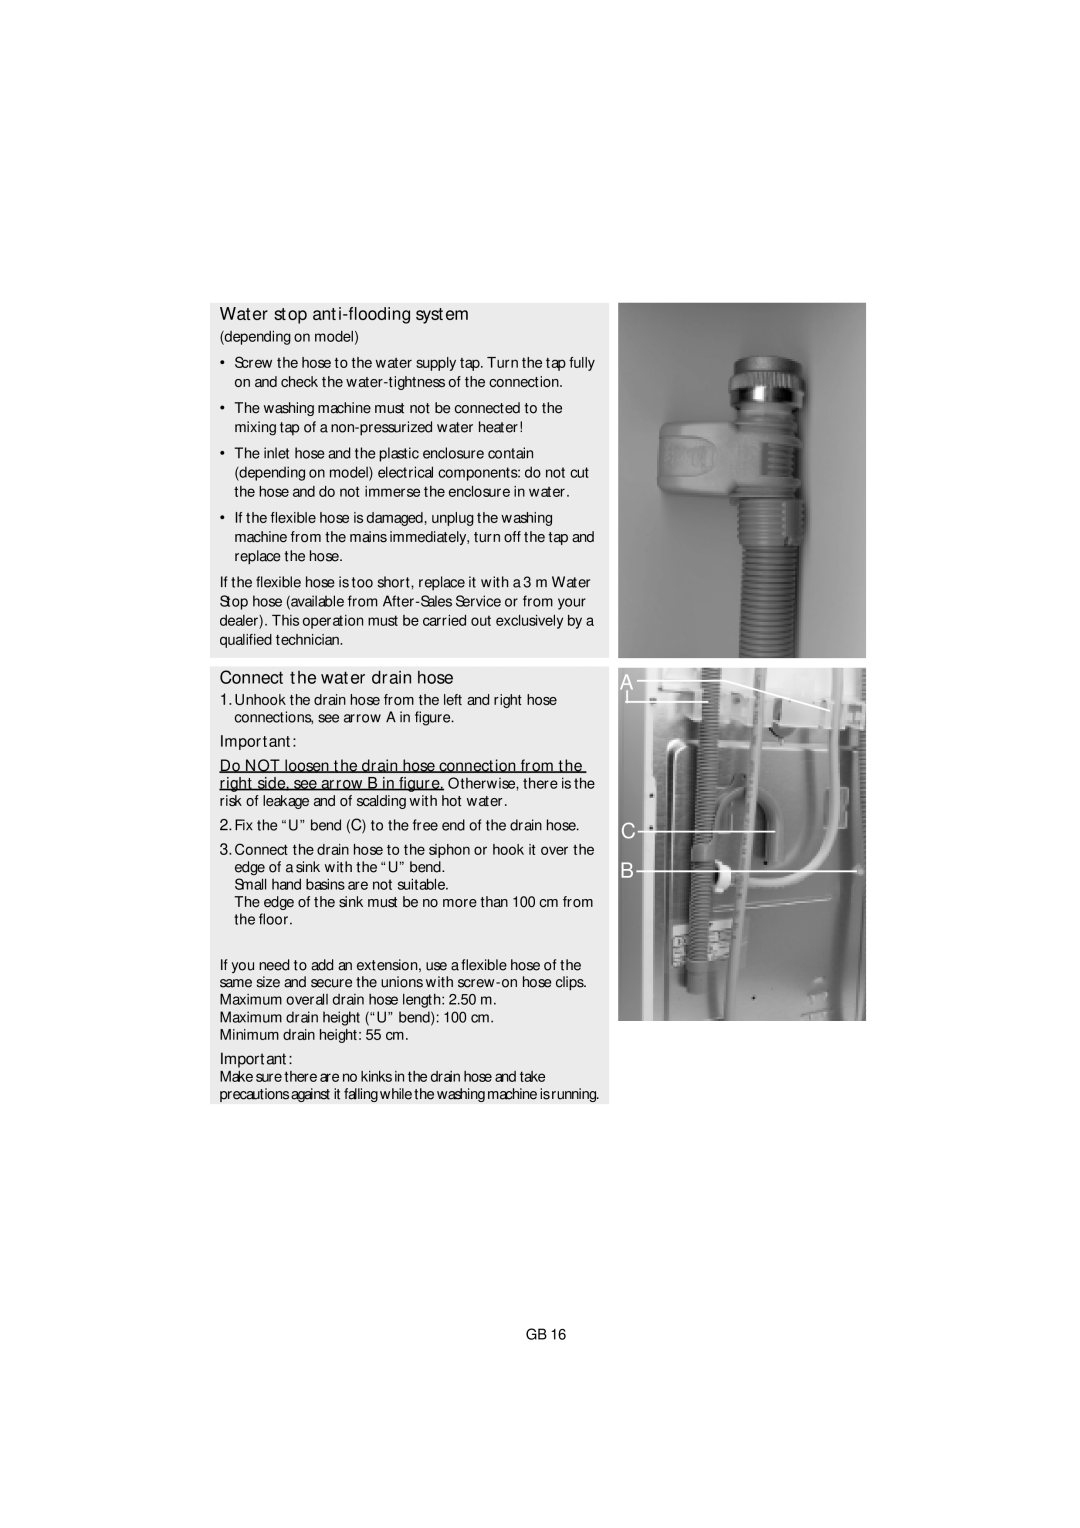 Smeg GB ST L80 manual Water stop anti-flooding system, Connect the water drain hose 